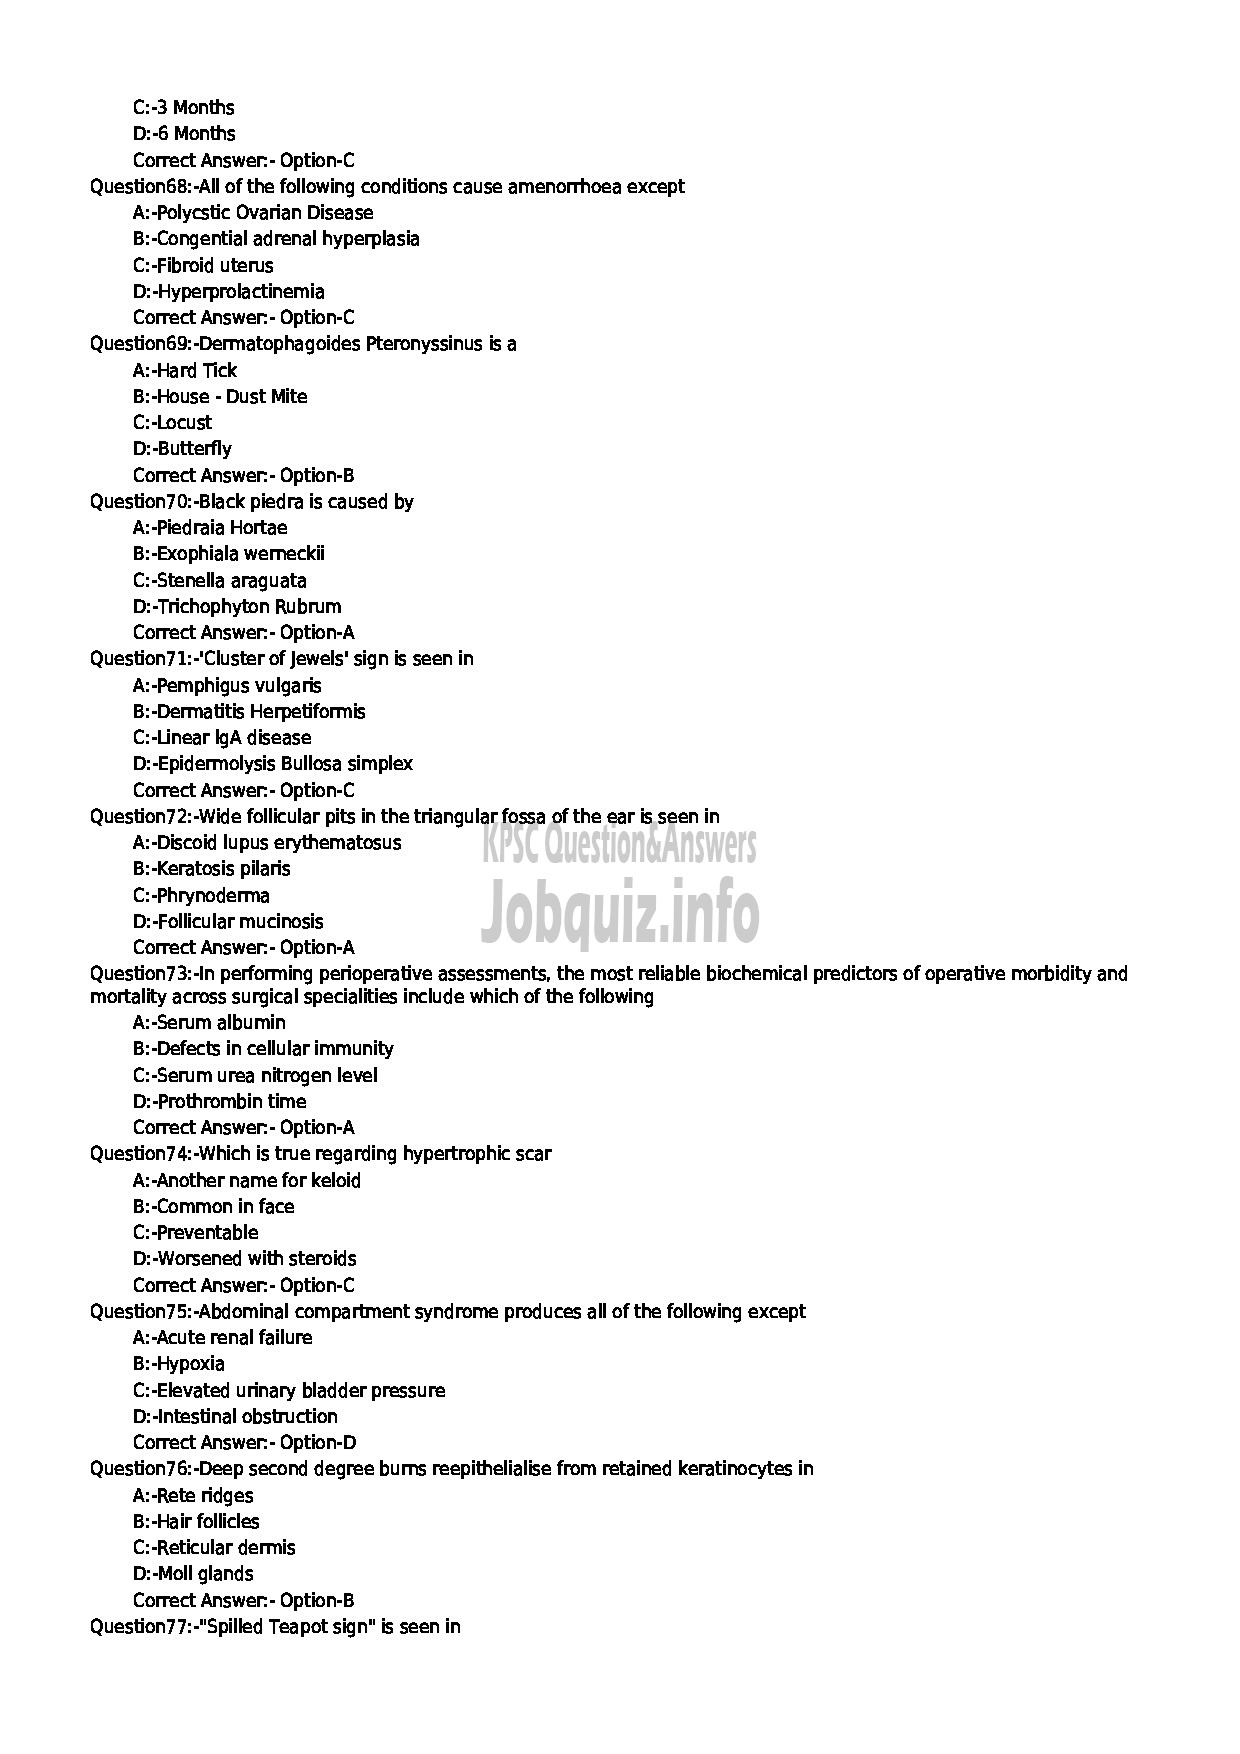 Kerala PSC Question Paper - Assistant Surgeon / casuality Medicine NCA Medical Education-8